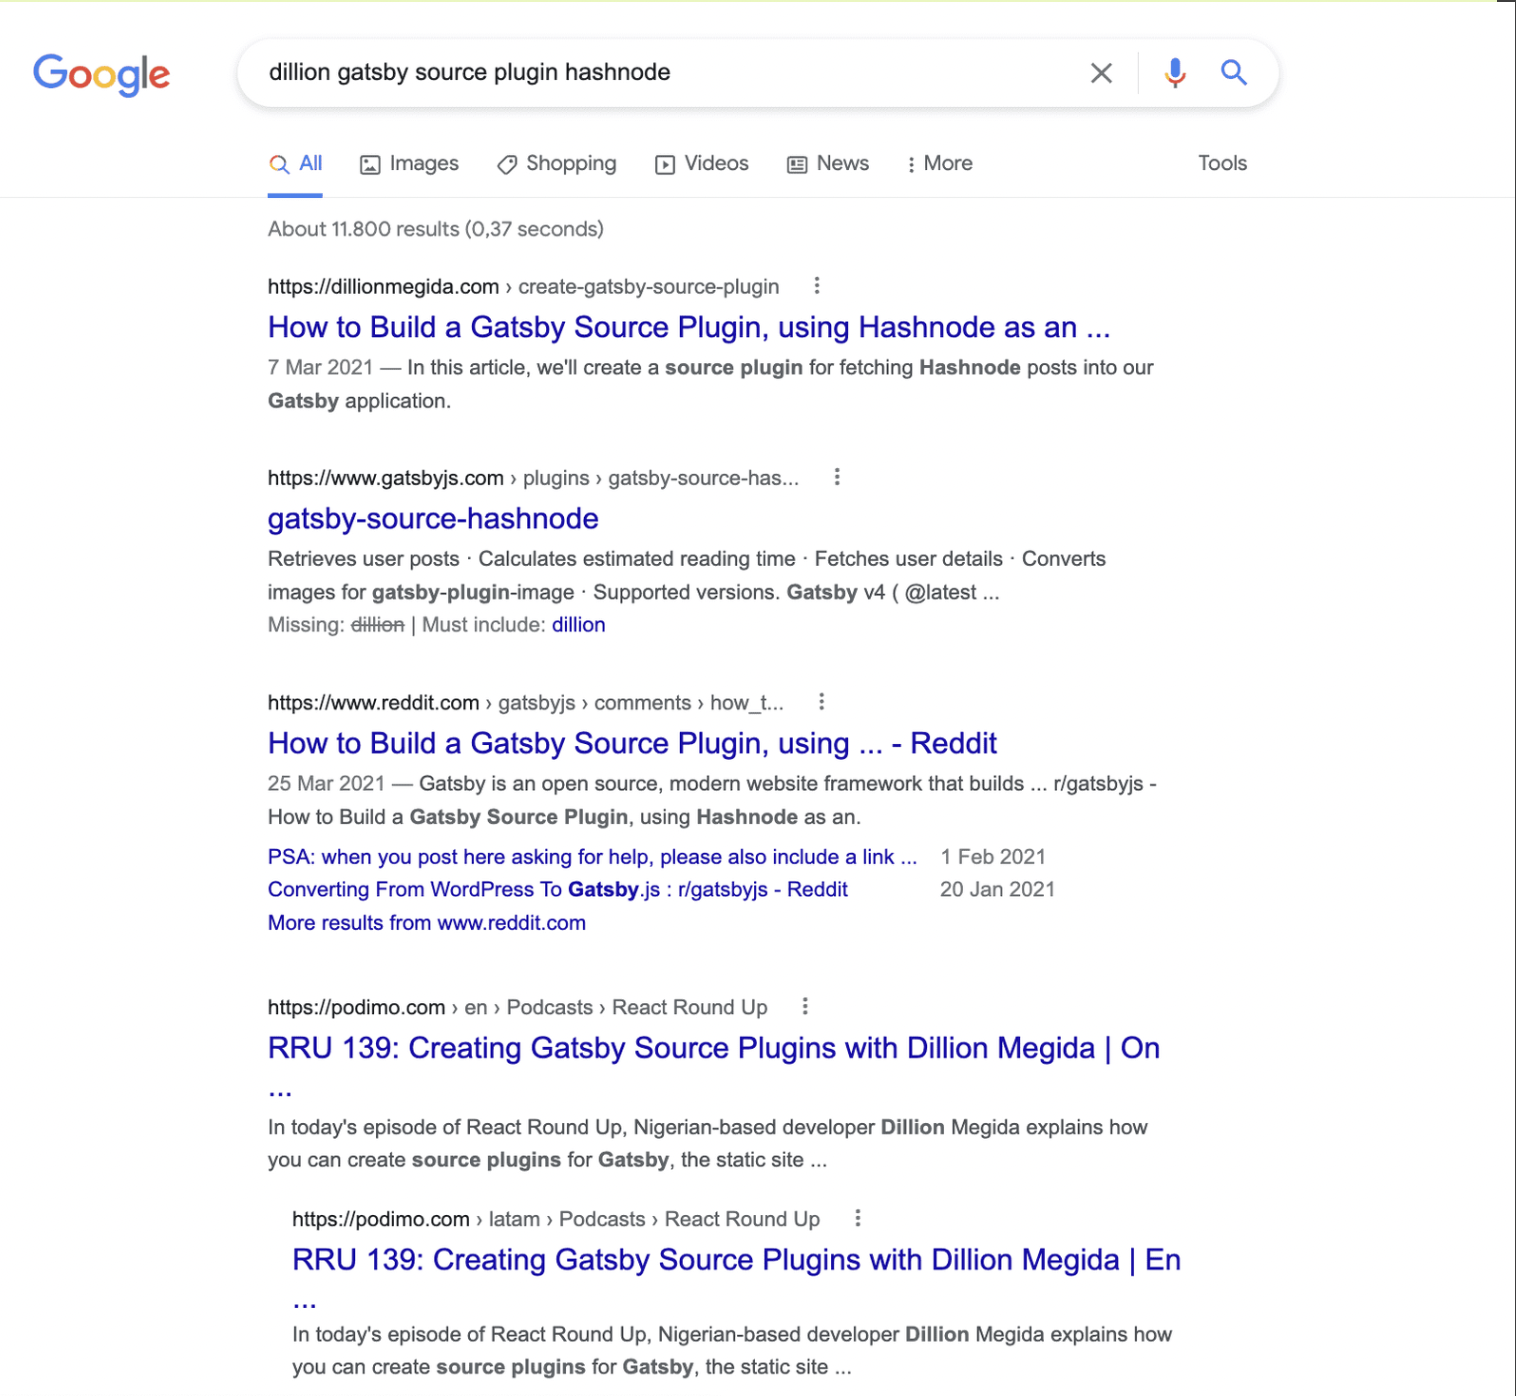 Google search results page for "dillion gatsby source plugin hashnode"